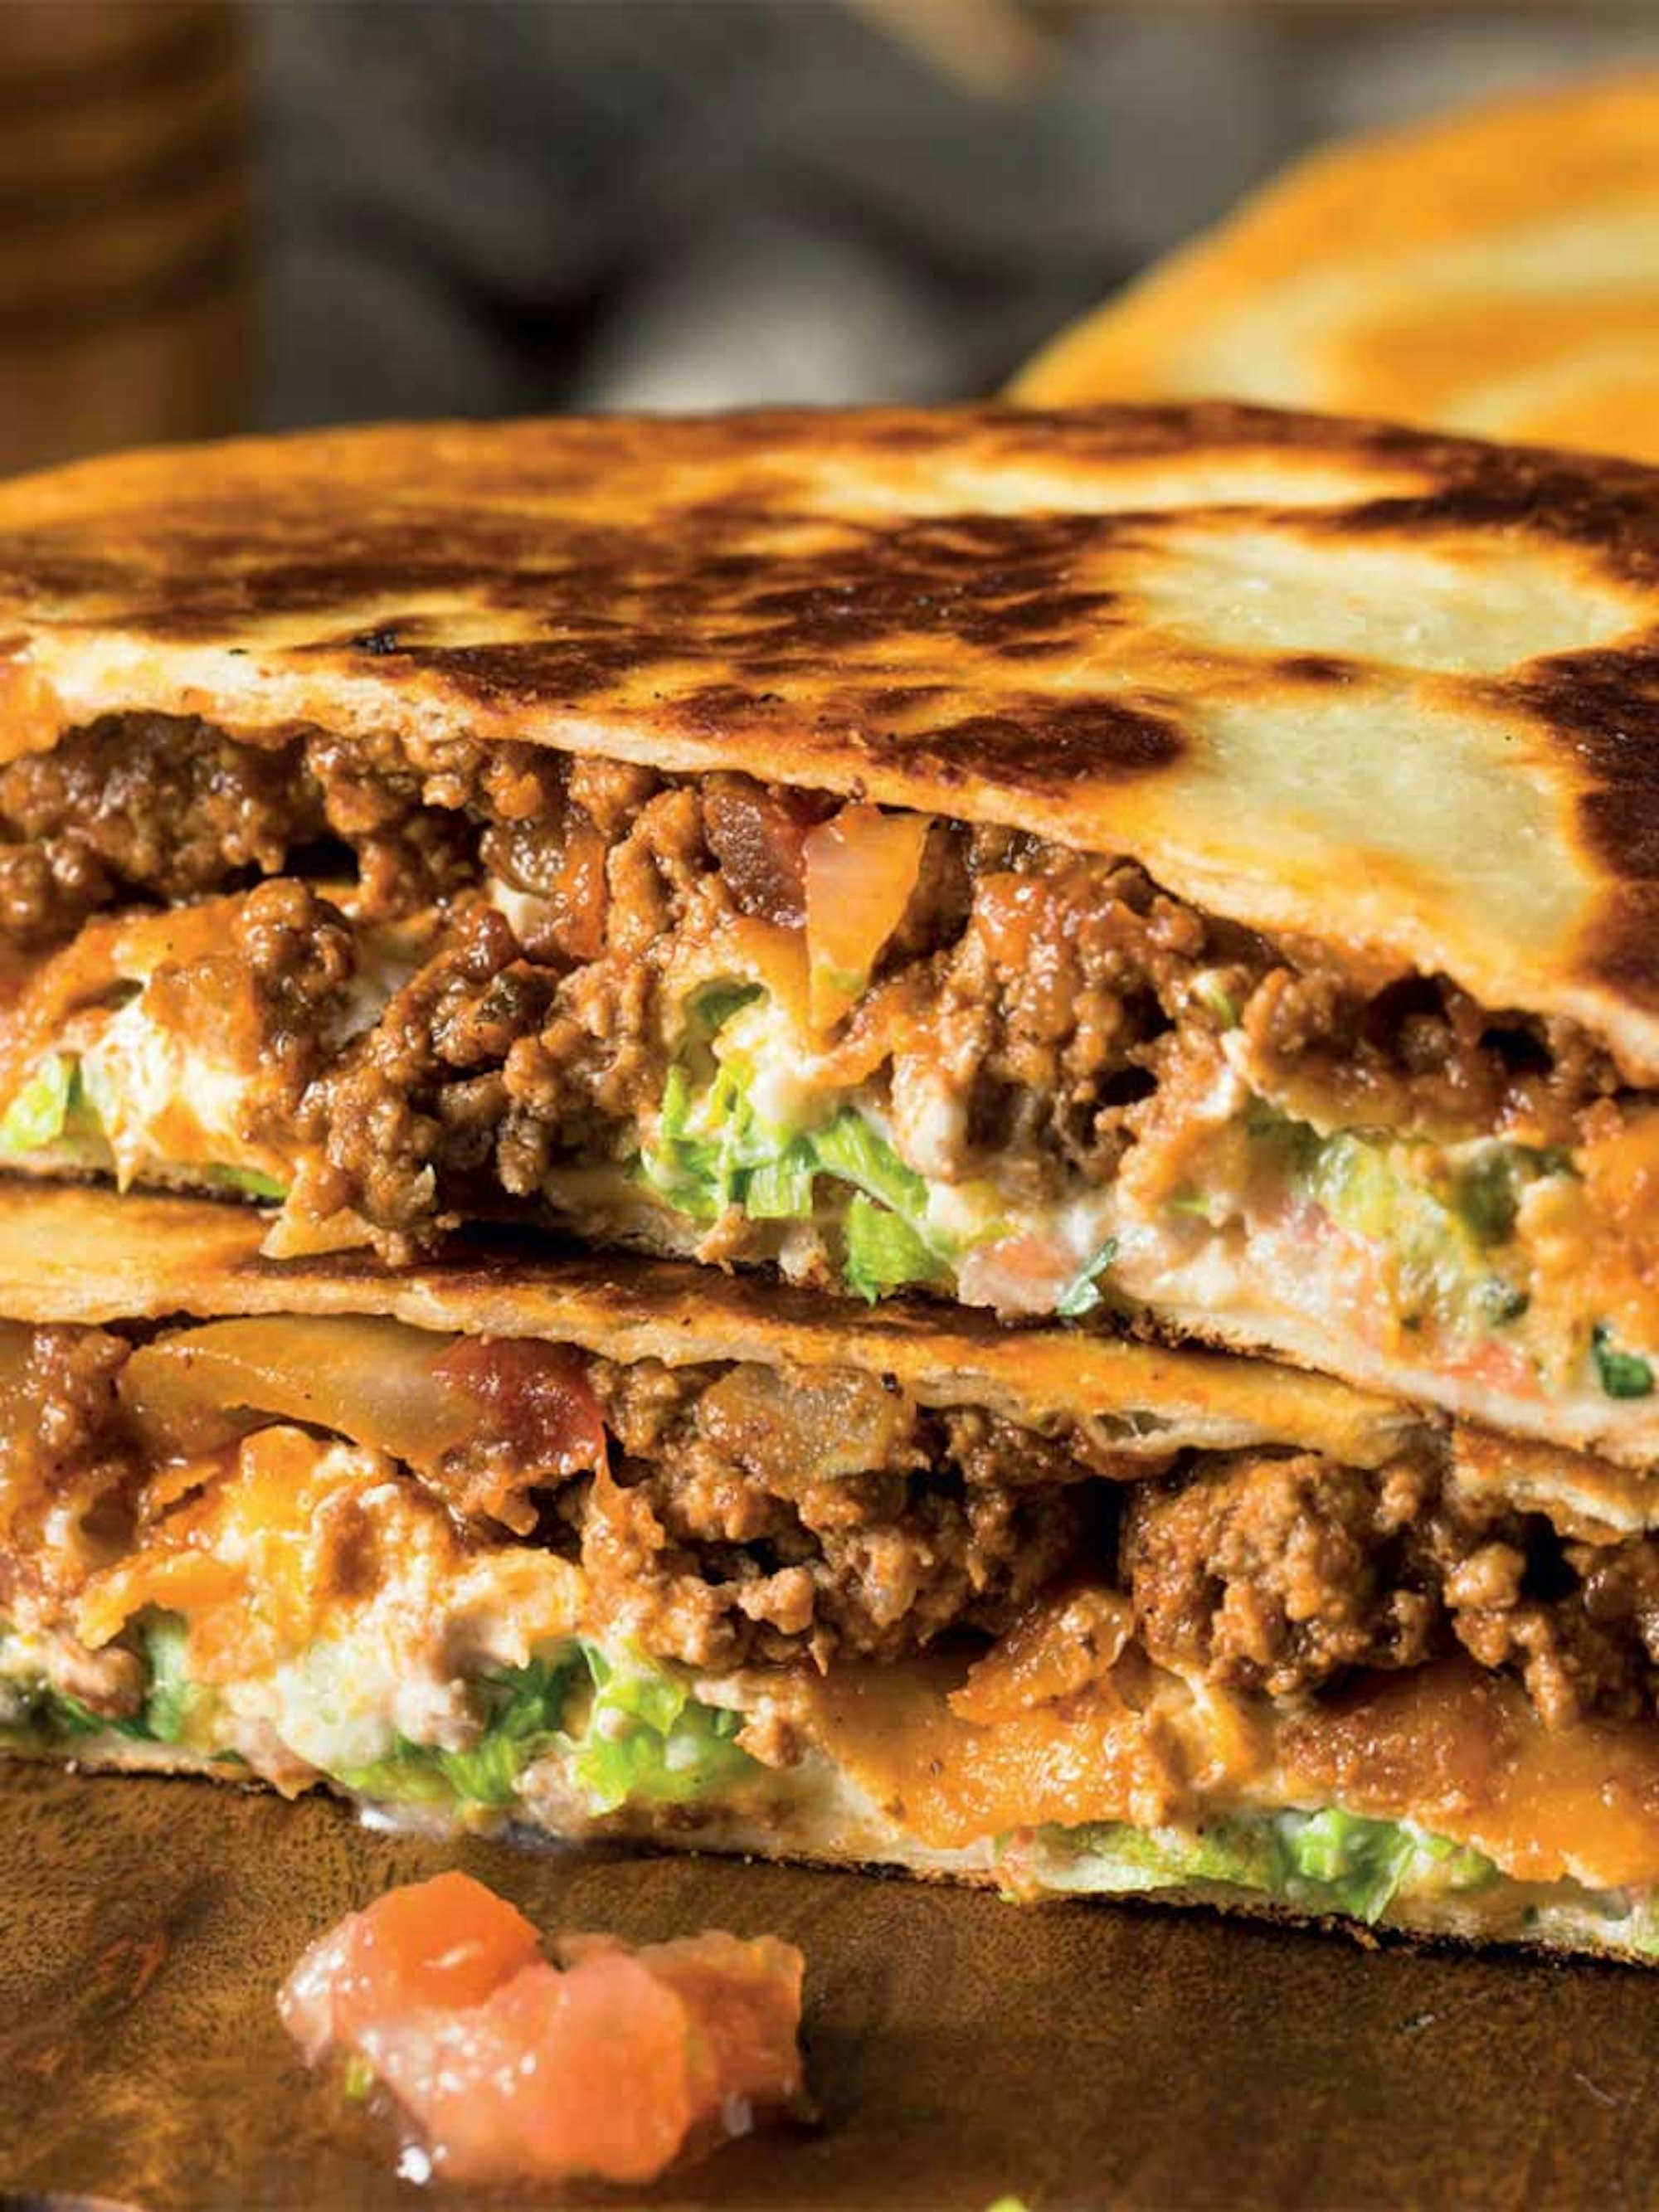 Contact Grill Easy Beef Quesadillas recipe | House blog